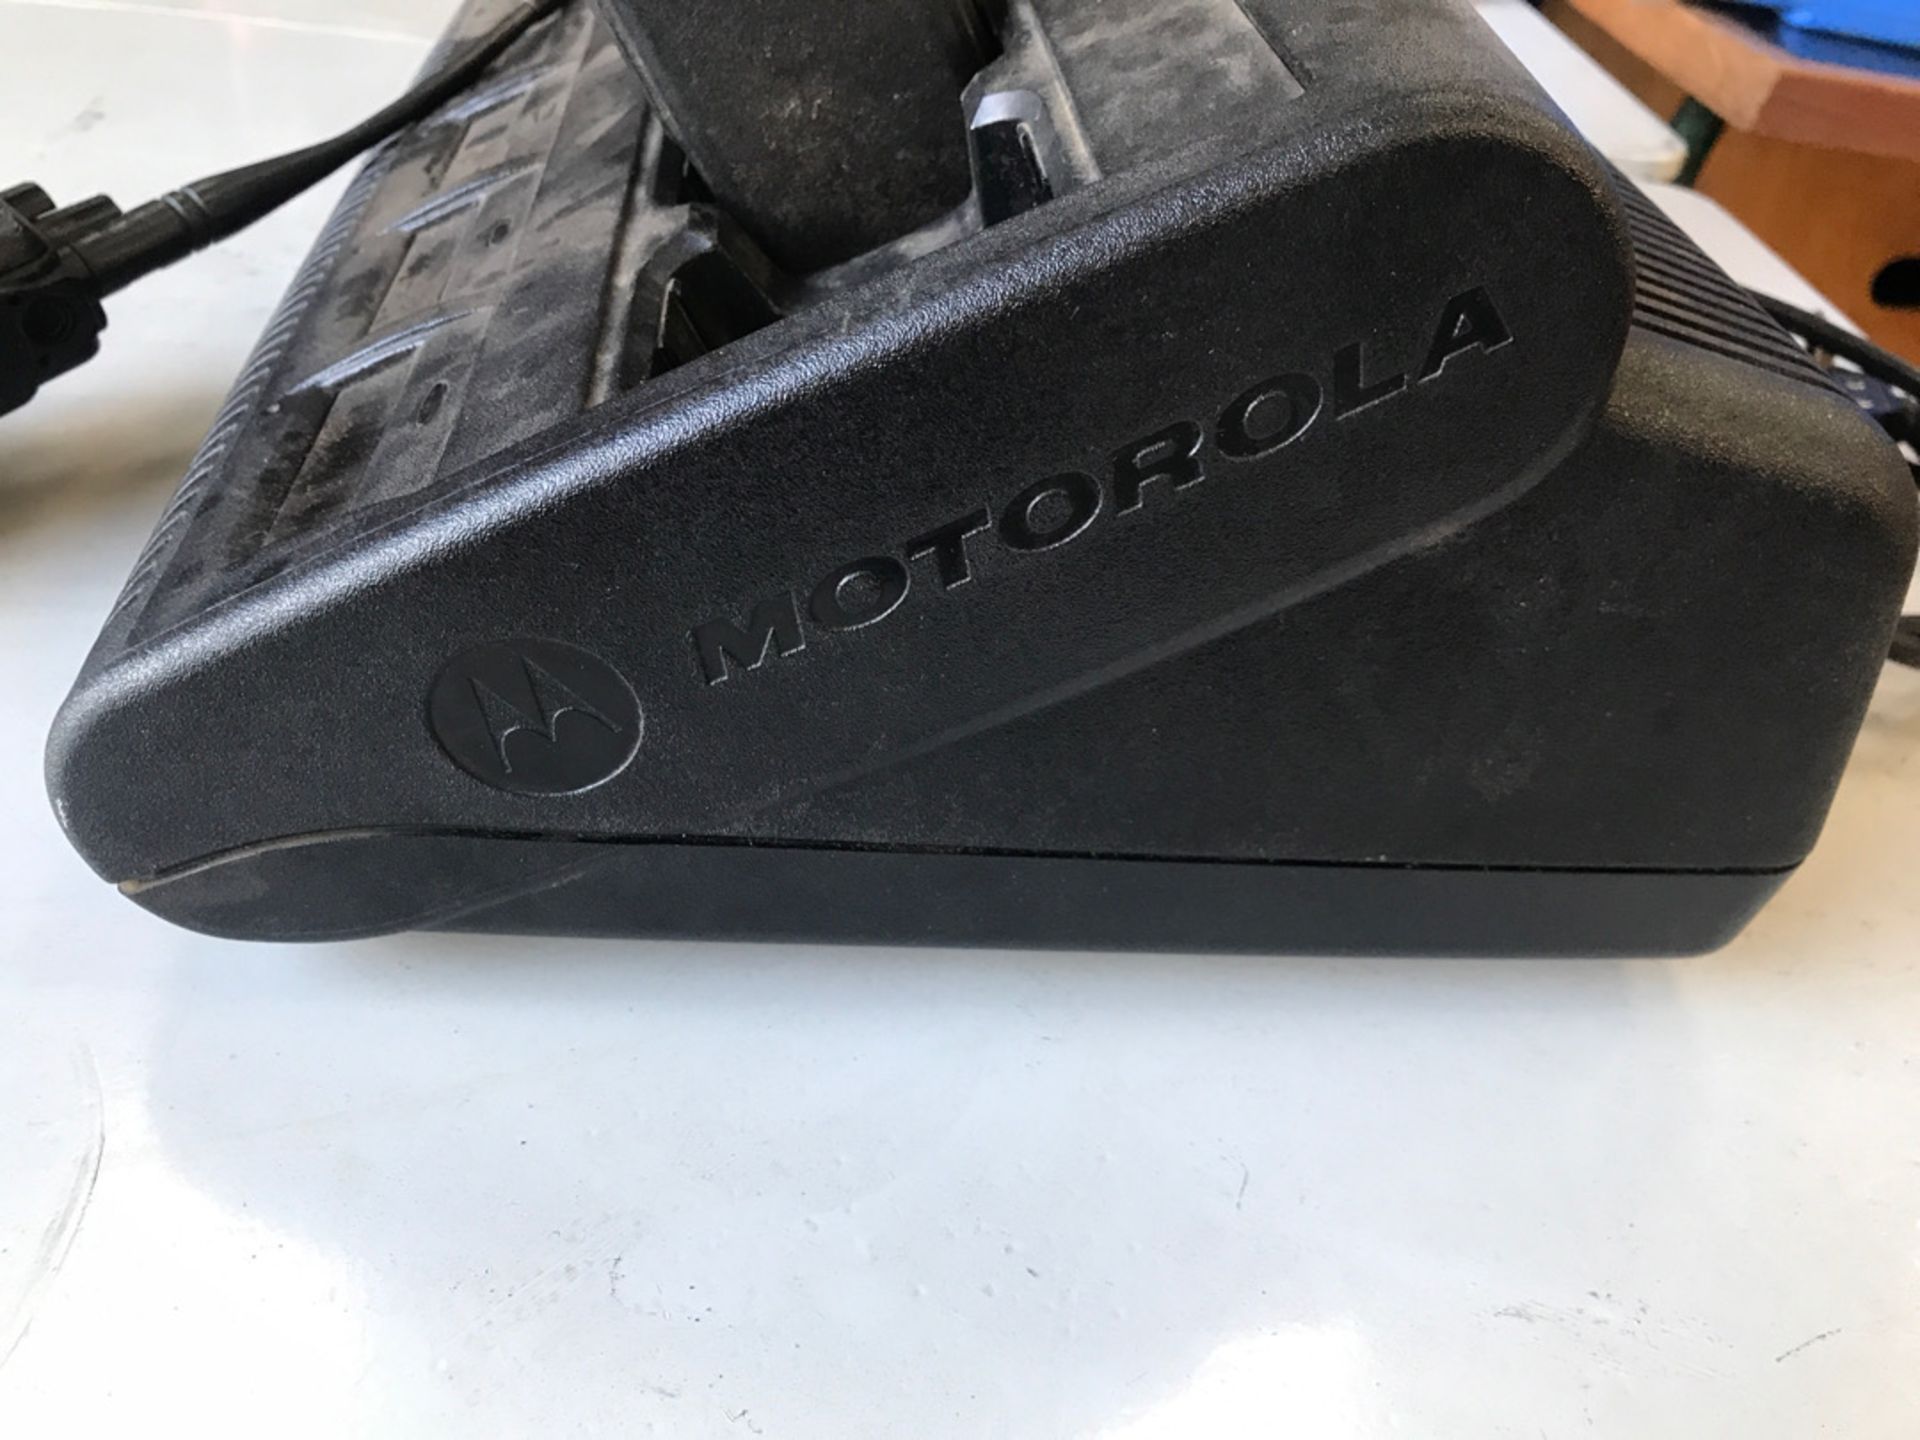 Impress adaptive charger to include for Motorola handheld radios NO RESERVE - Image 5 of 5